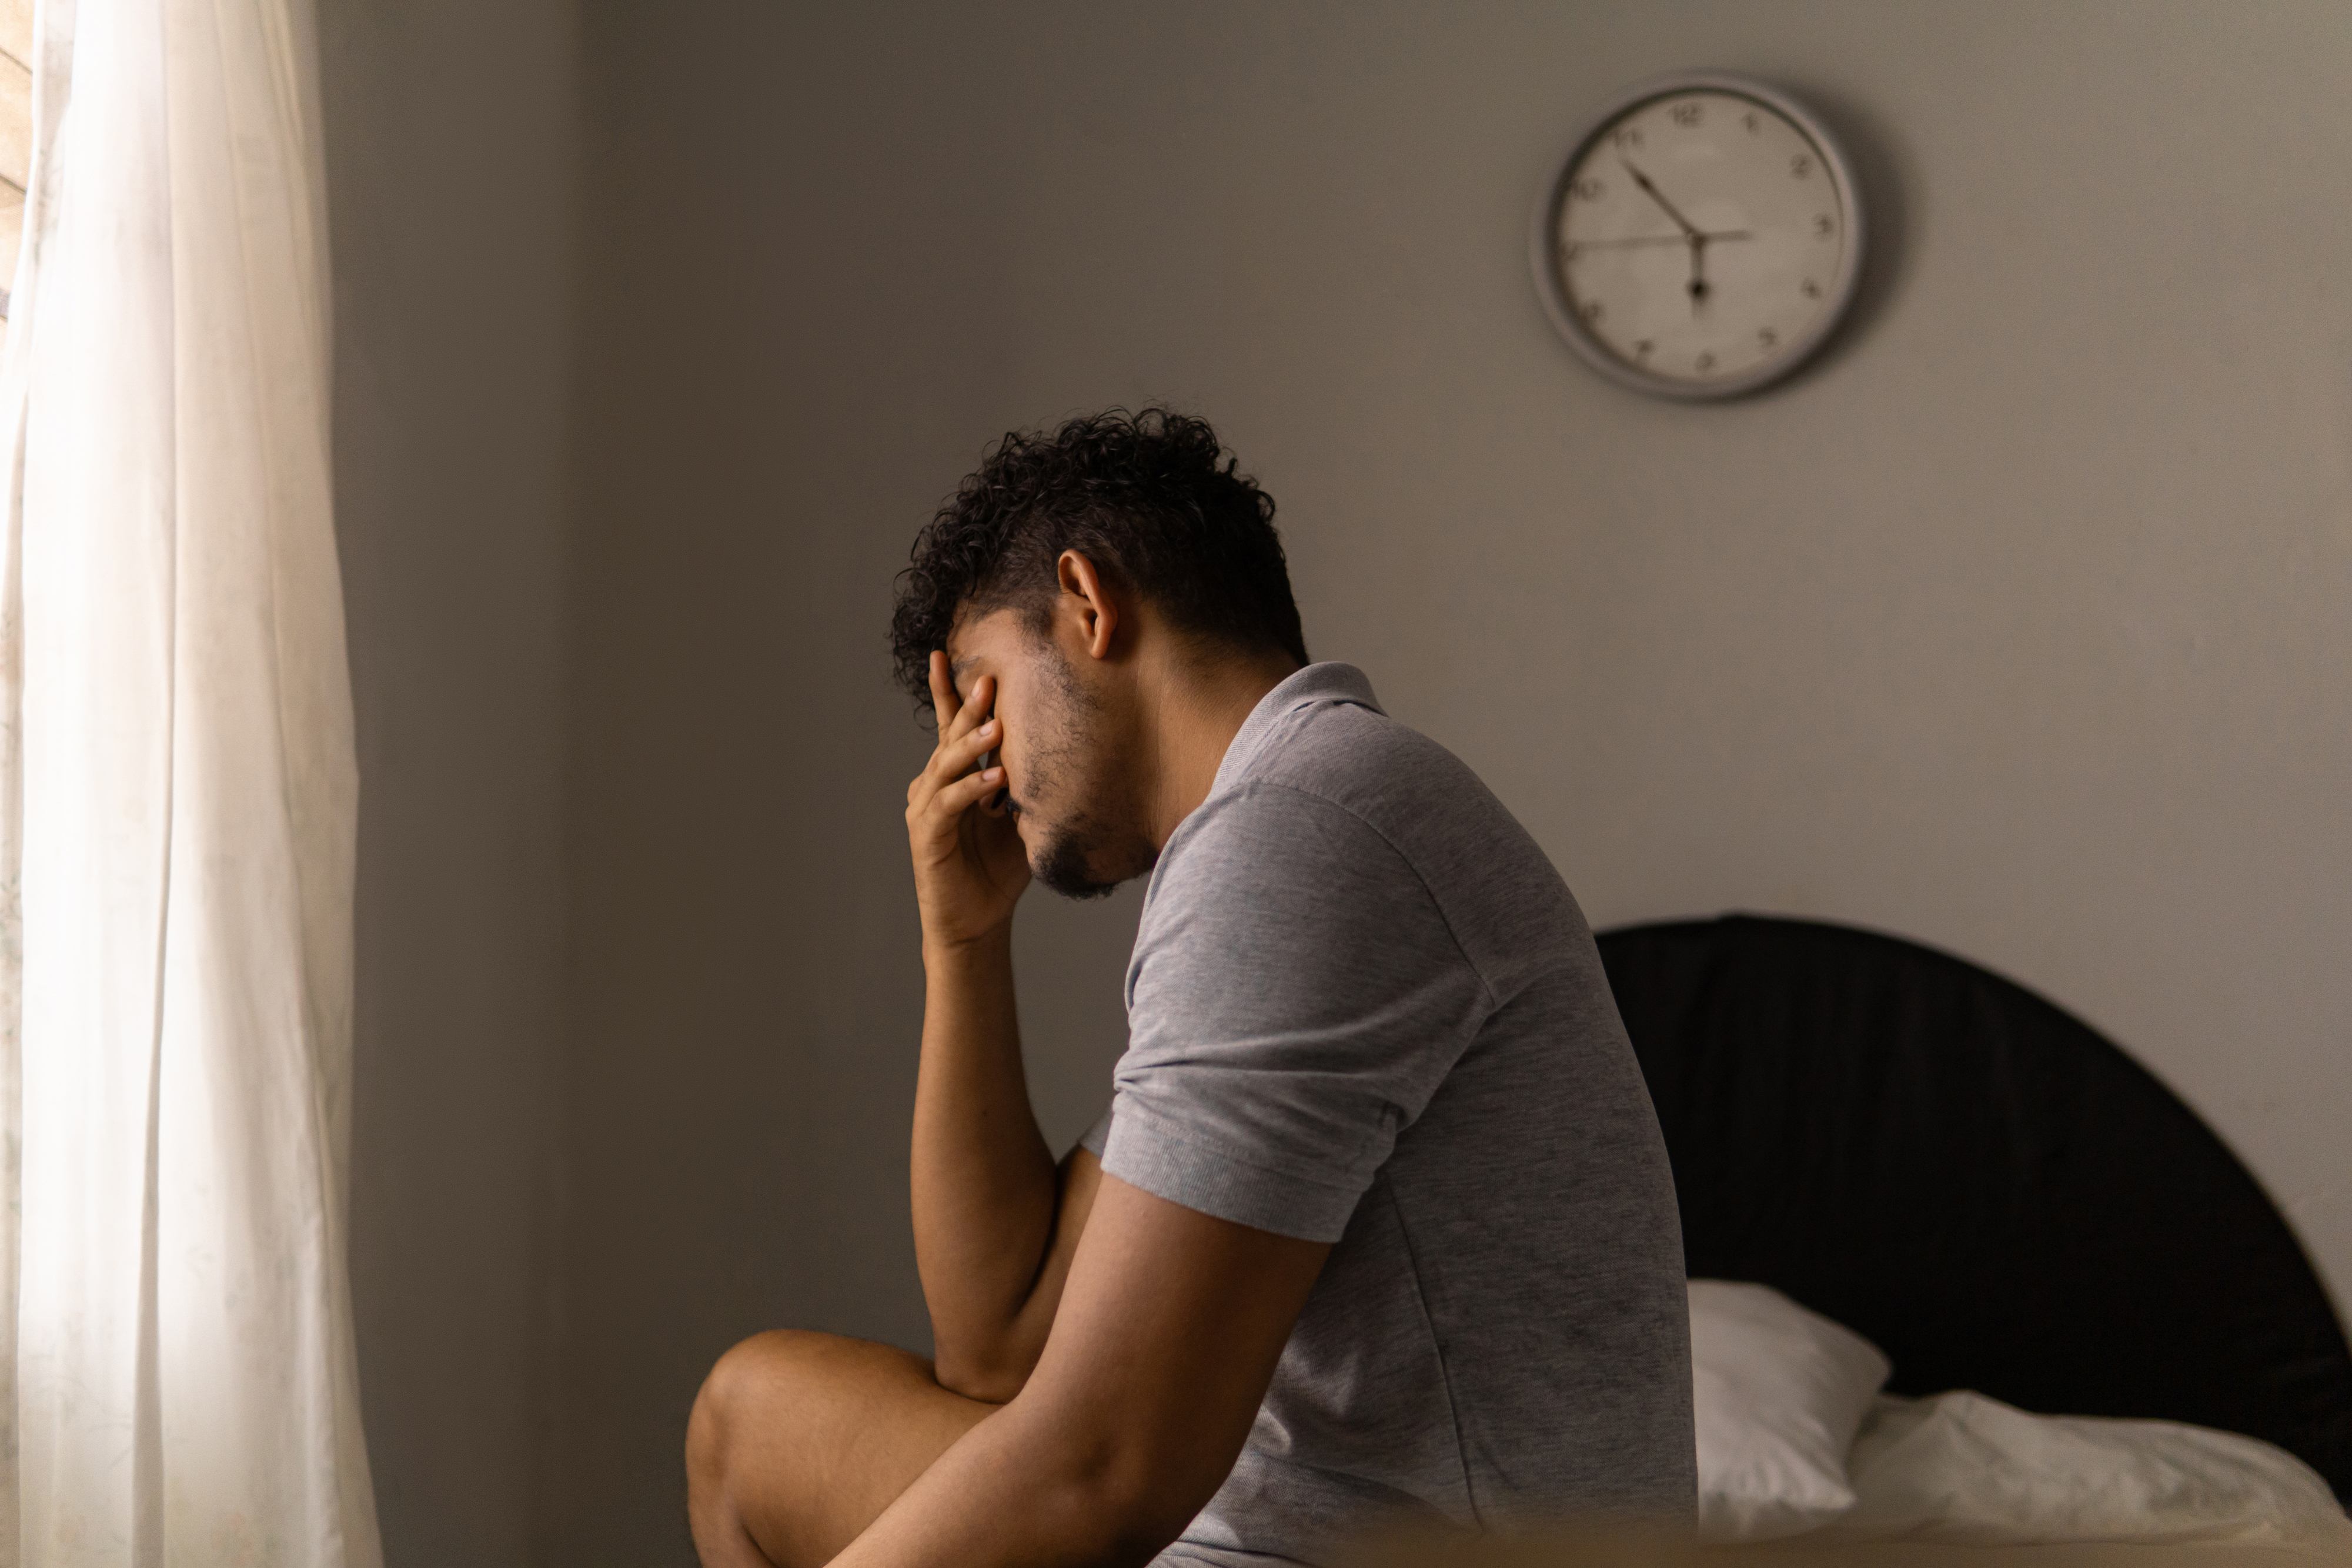 Person sitting on bed with hand on face in a contemplative or distressed pose, clock on the wall in the background